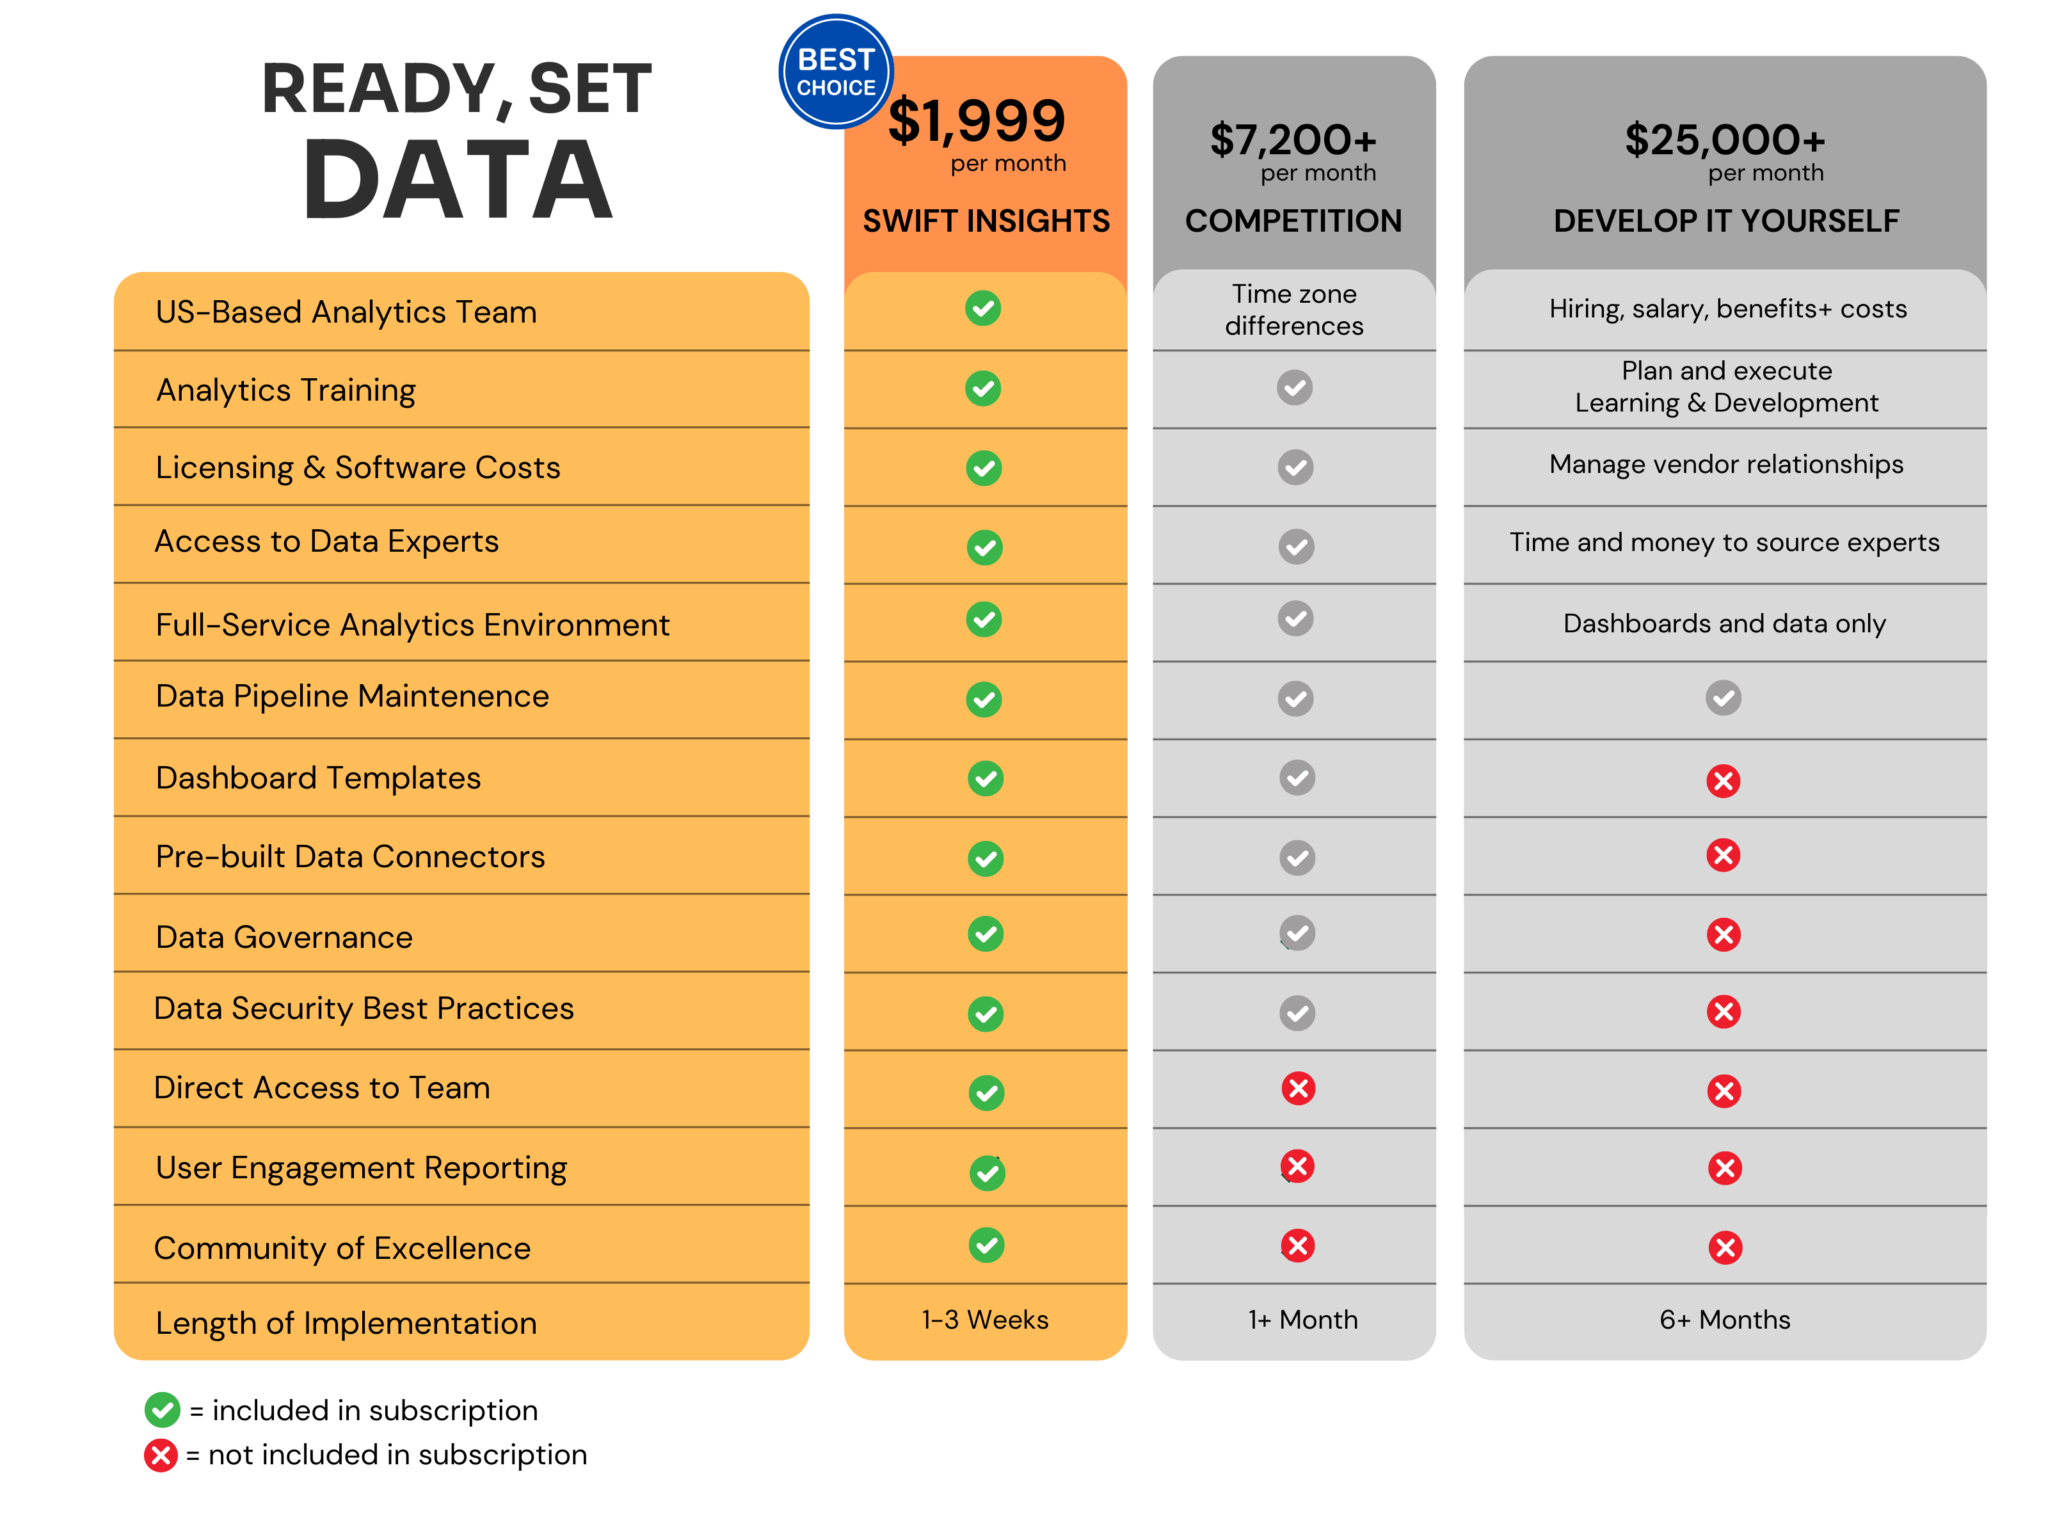 Ready, Set, Data - AaaS Product Pricing